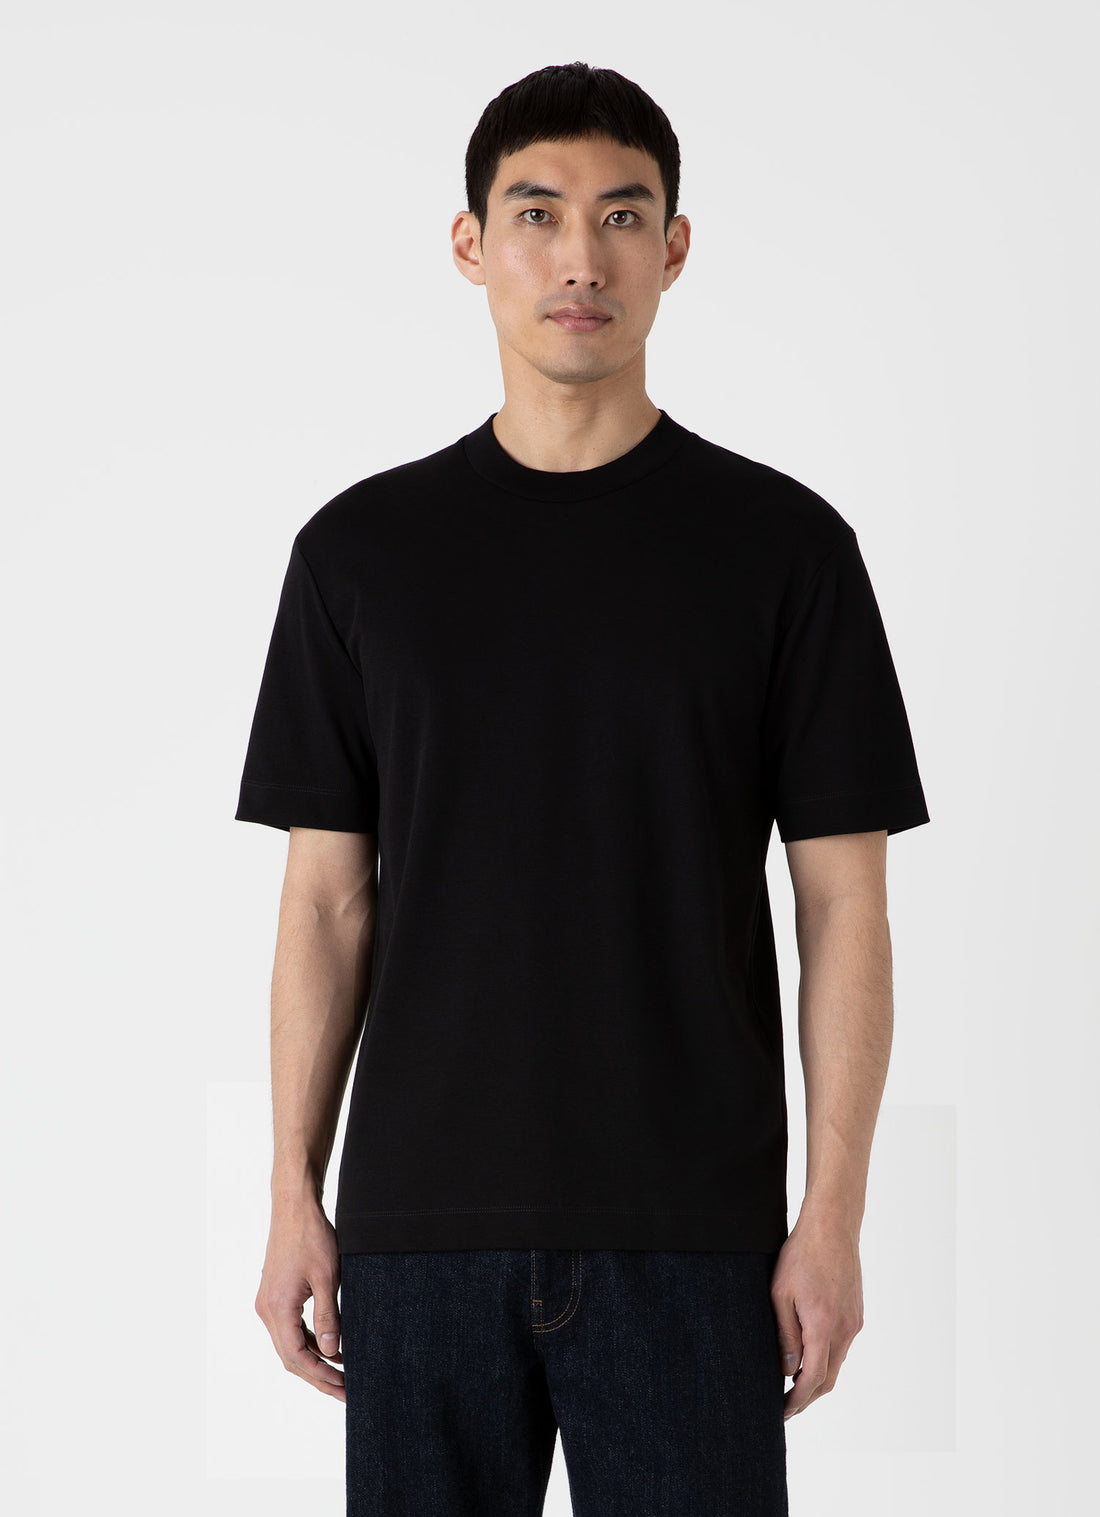 Men's Relaxed Fit Heavyweight T-shirt in Black